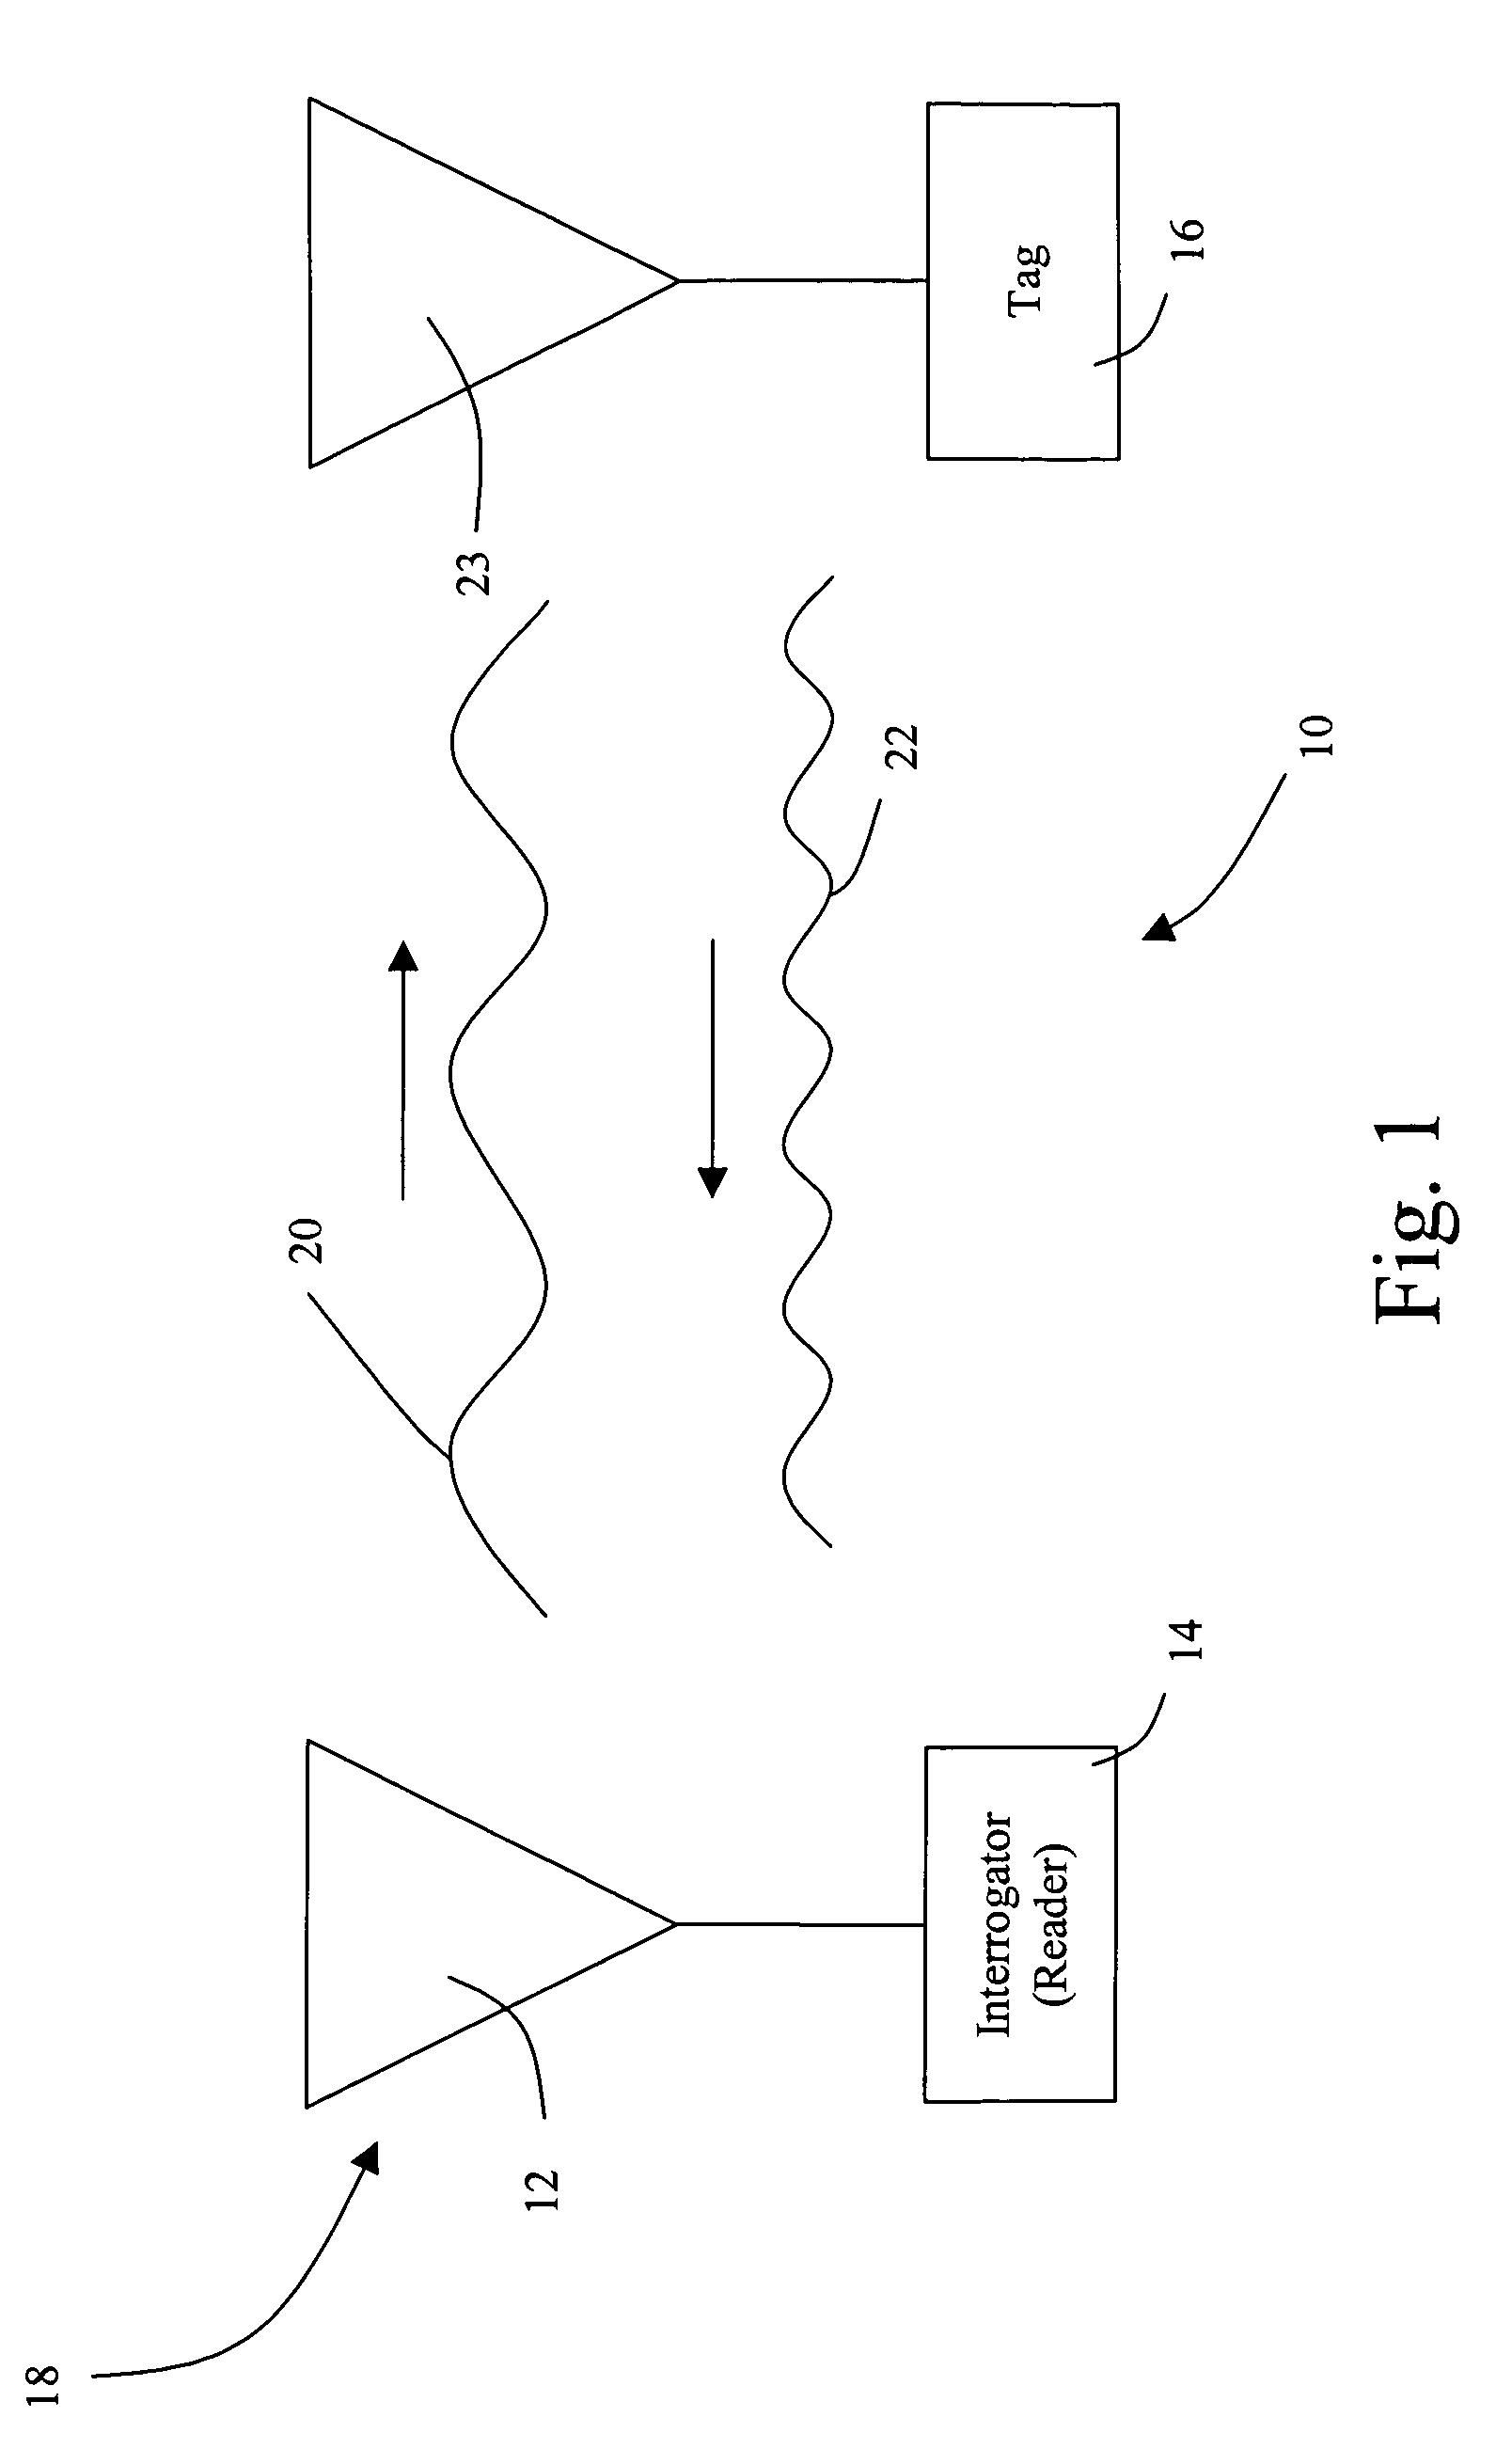 Remote communication device and system for communication